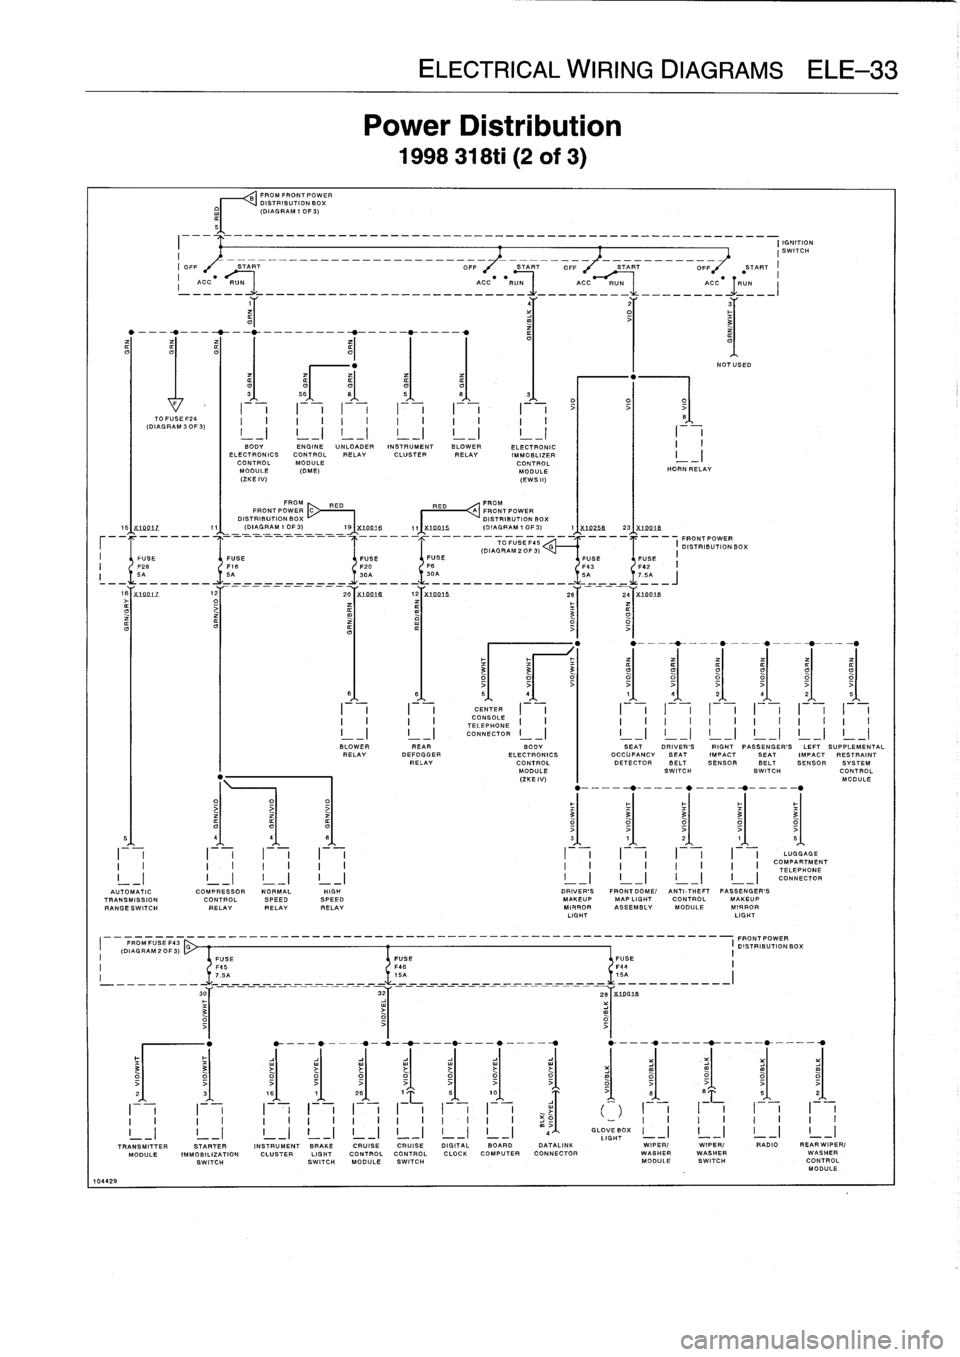 BMW M3 1993 E36 Repair Manual 
10442
9

II
OFF

TO
FUSE
F14
(DIAGRAM
3
OF
3)

----------------------------------------------------
I
IGNITION
I
SWITCH
START
-----------------
OFF
--
START

	

OFF

	

START
----
OFF

	

START
I

a
